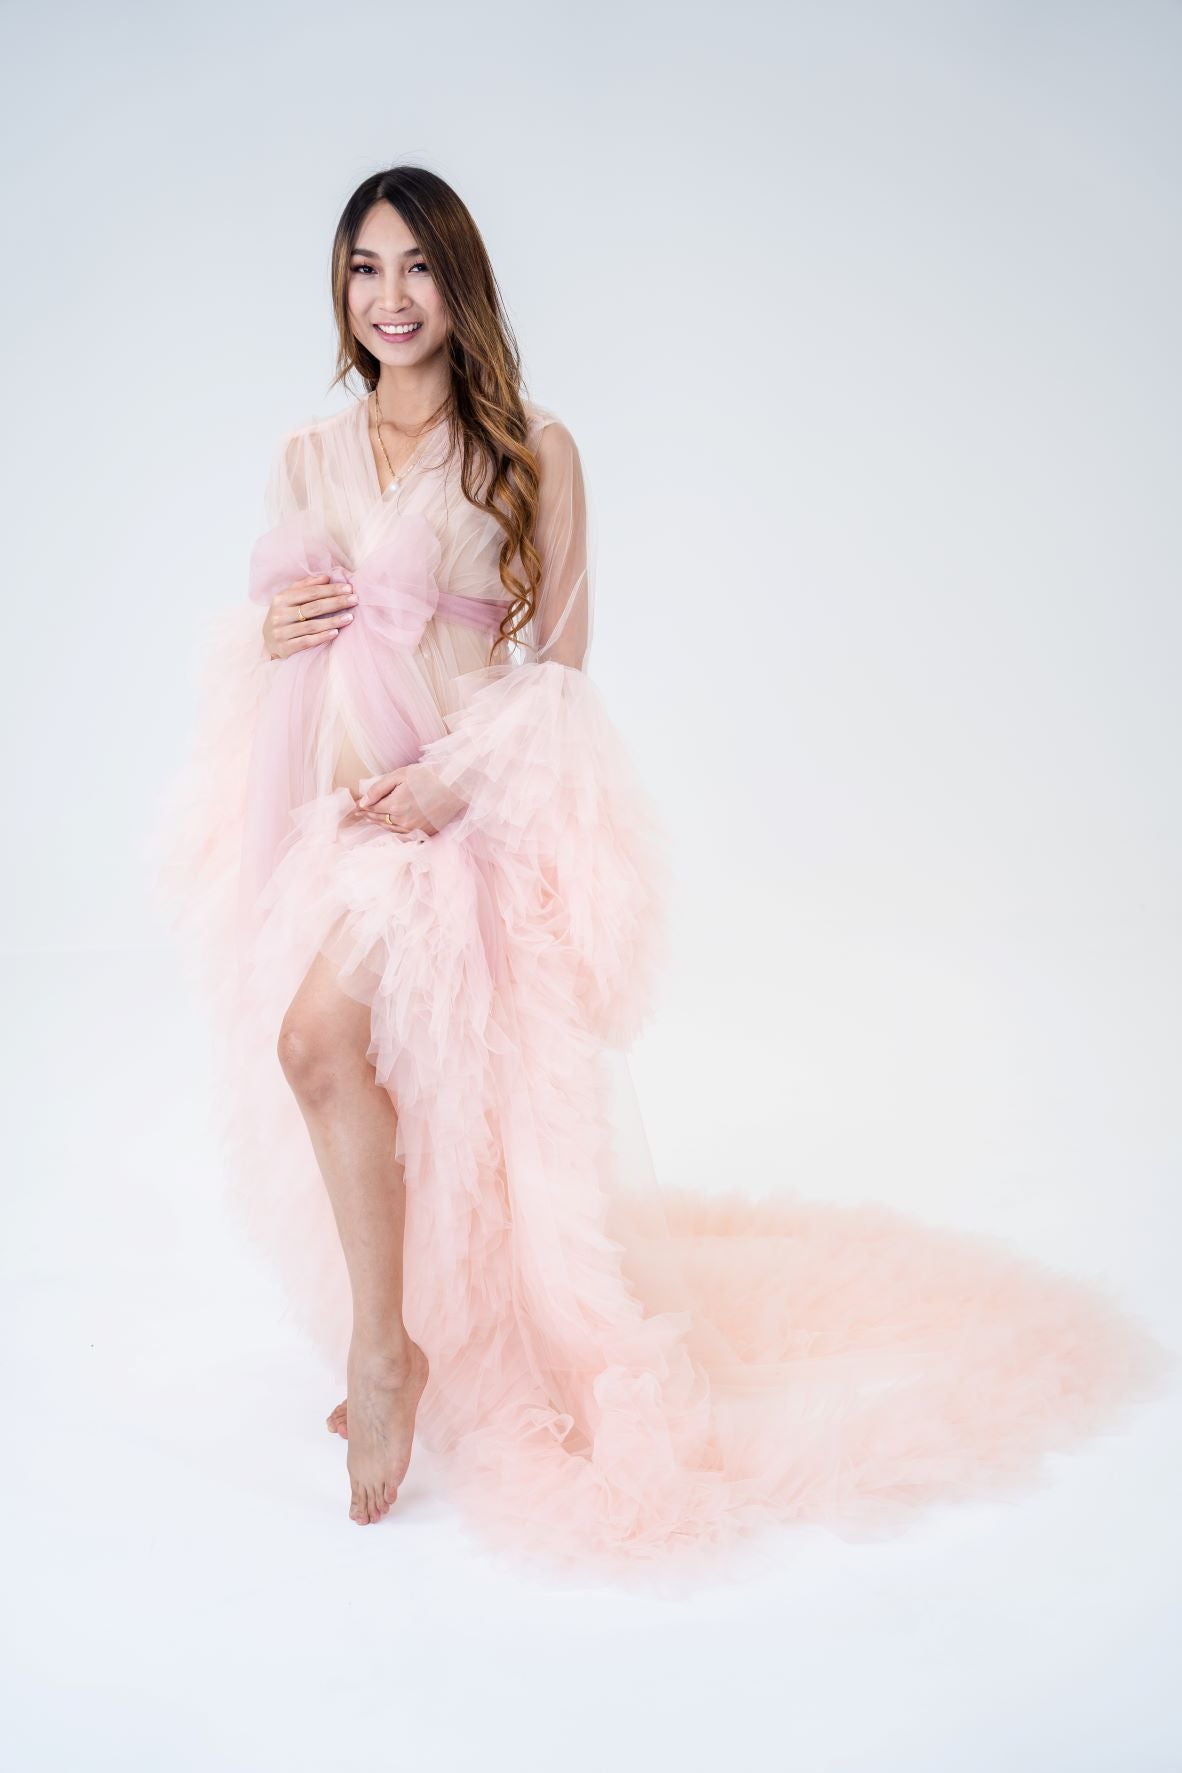 Maternity Photoshoot Dresses - Blush Pink Tulle Robe - Sophie - Luxe Bumps AU